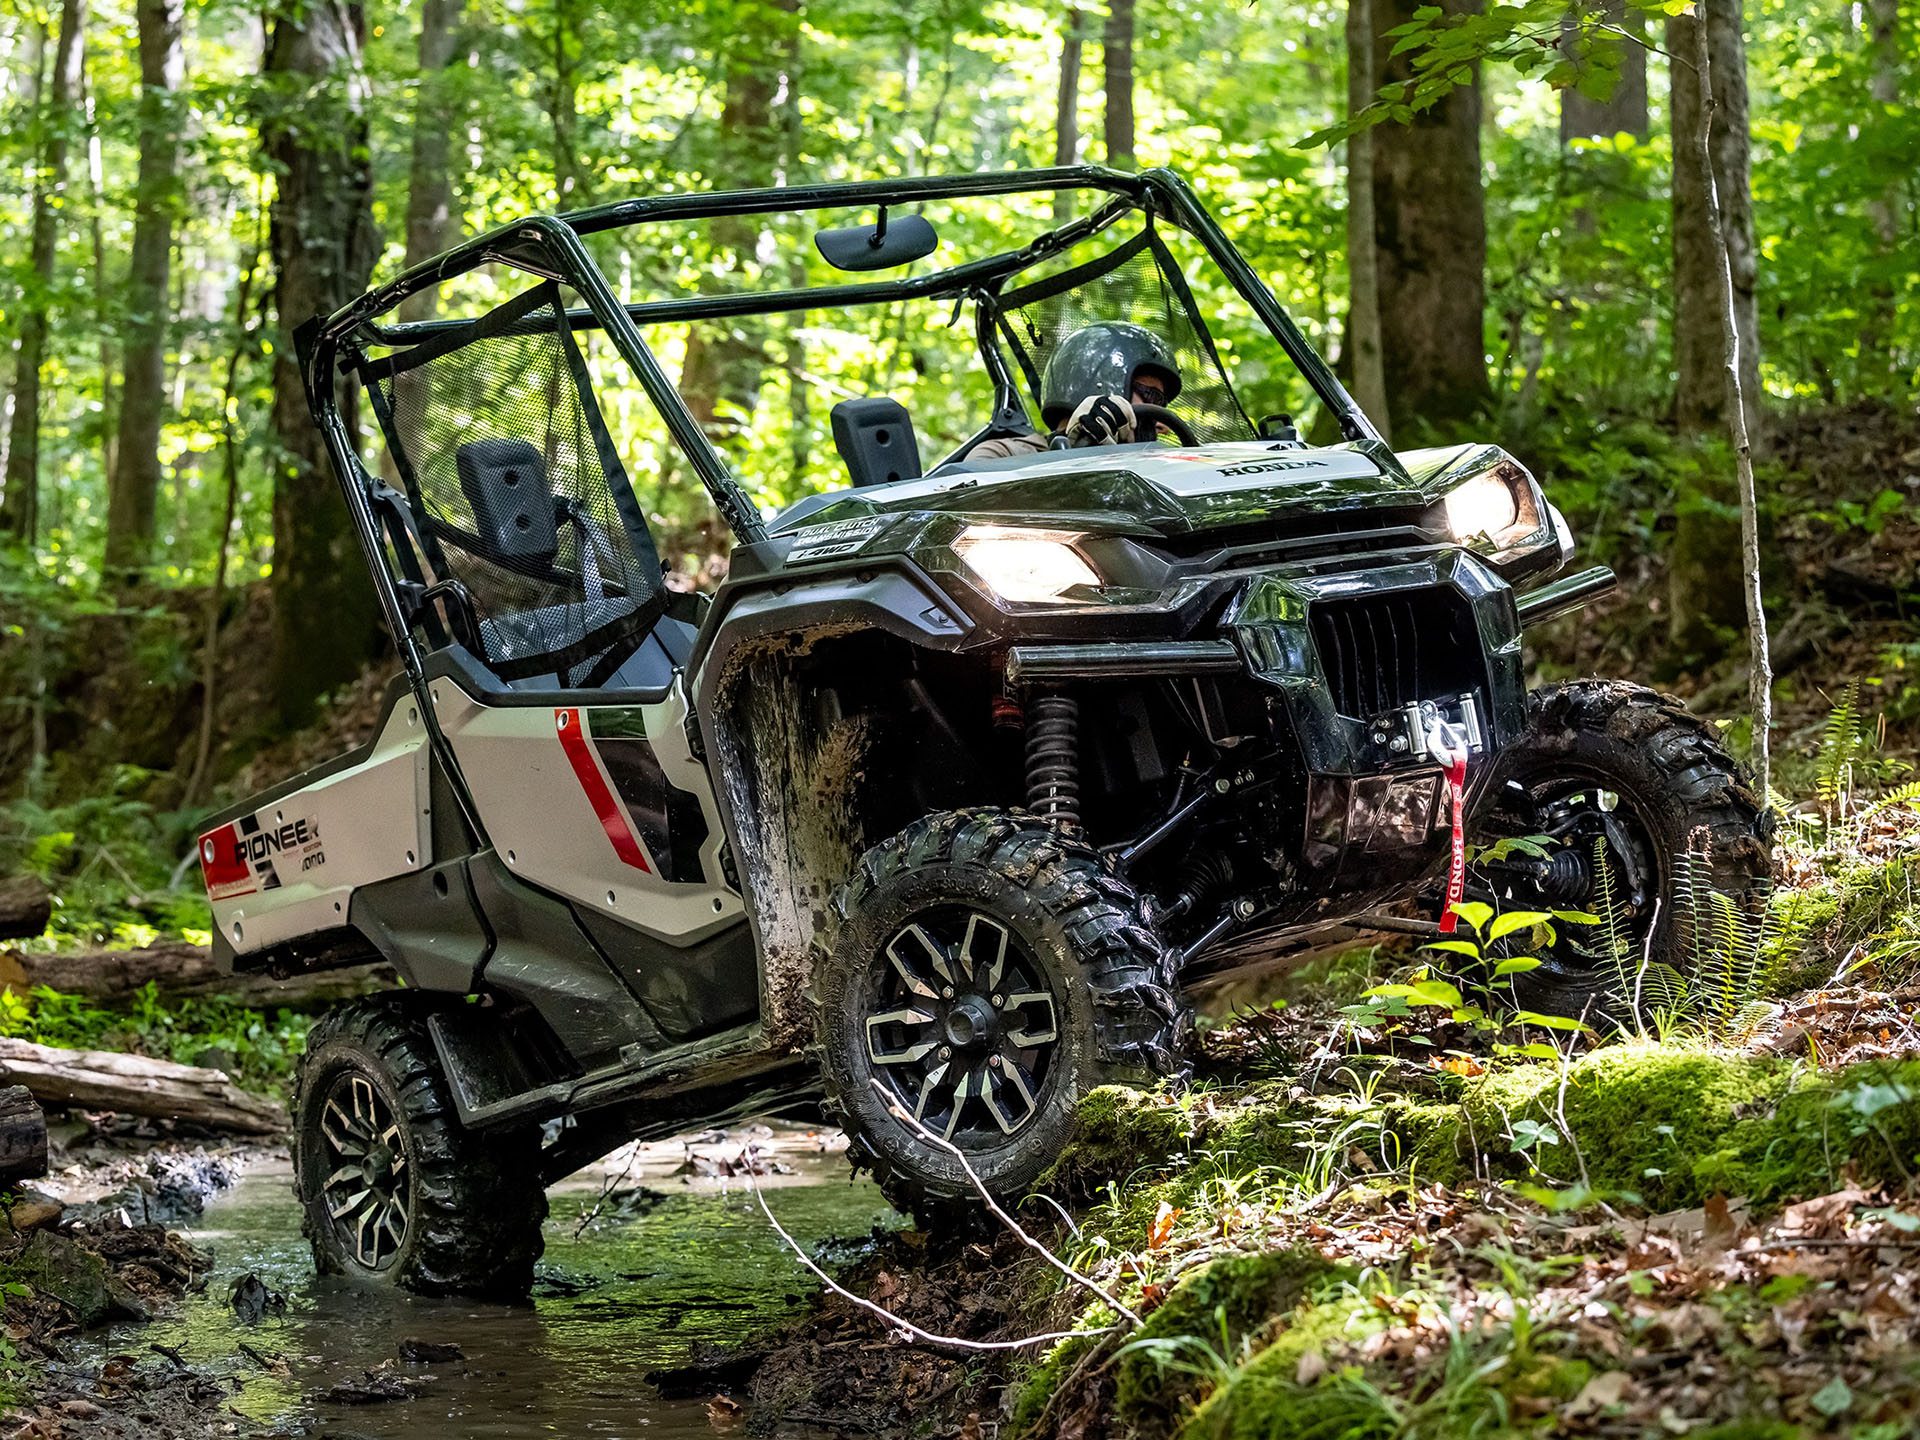 2022 Honda Pioneer 1000 Deluxe in Lincoln, Maine - Photo 5